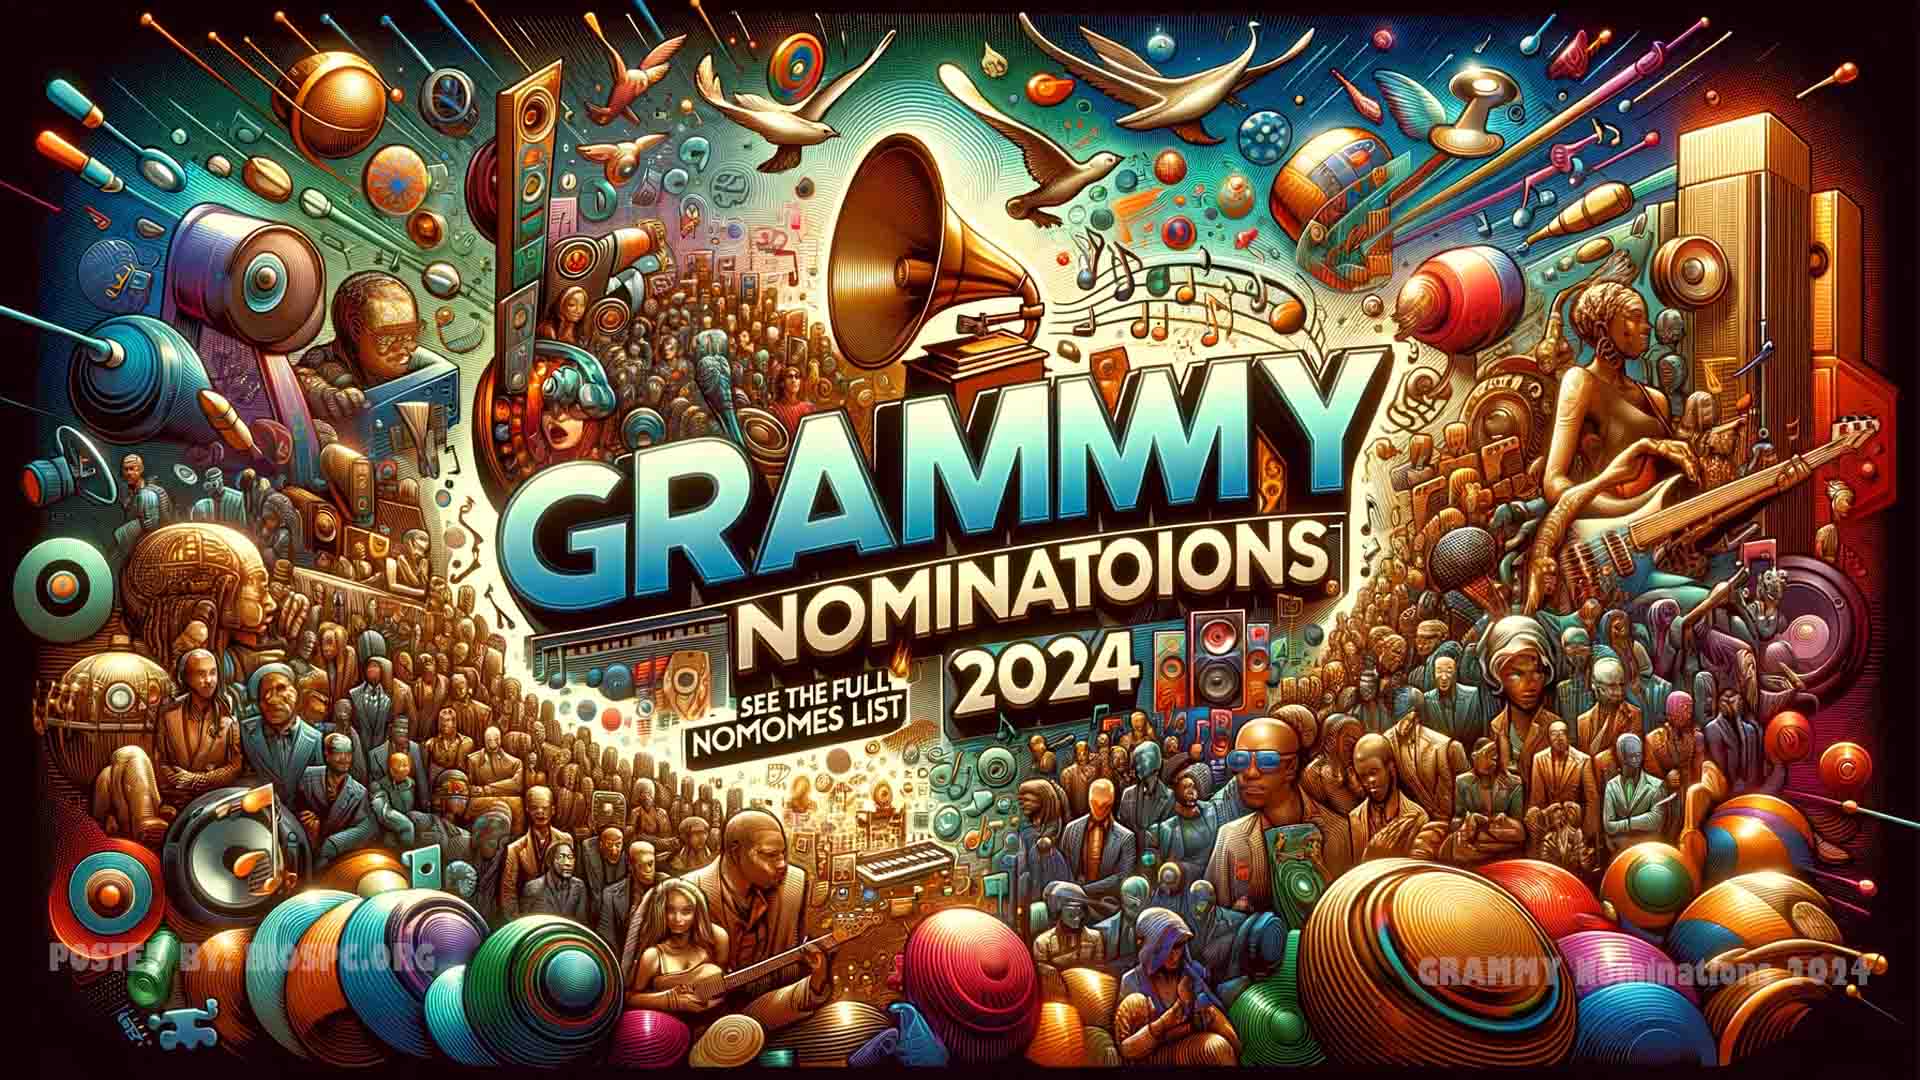 GRAMMY Nominations 2024 See The Full Nominees List?